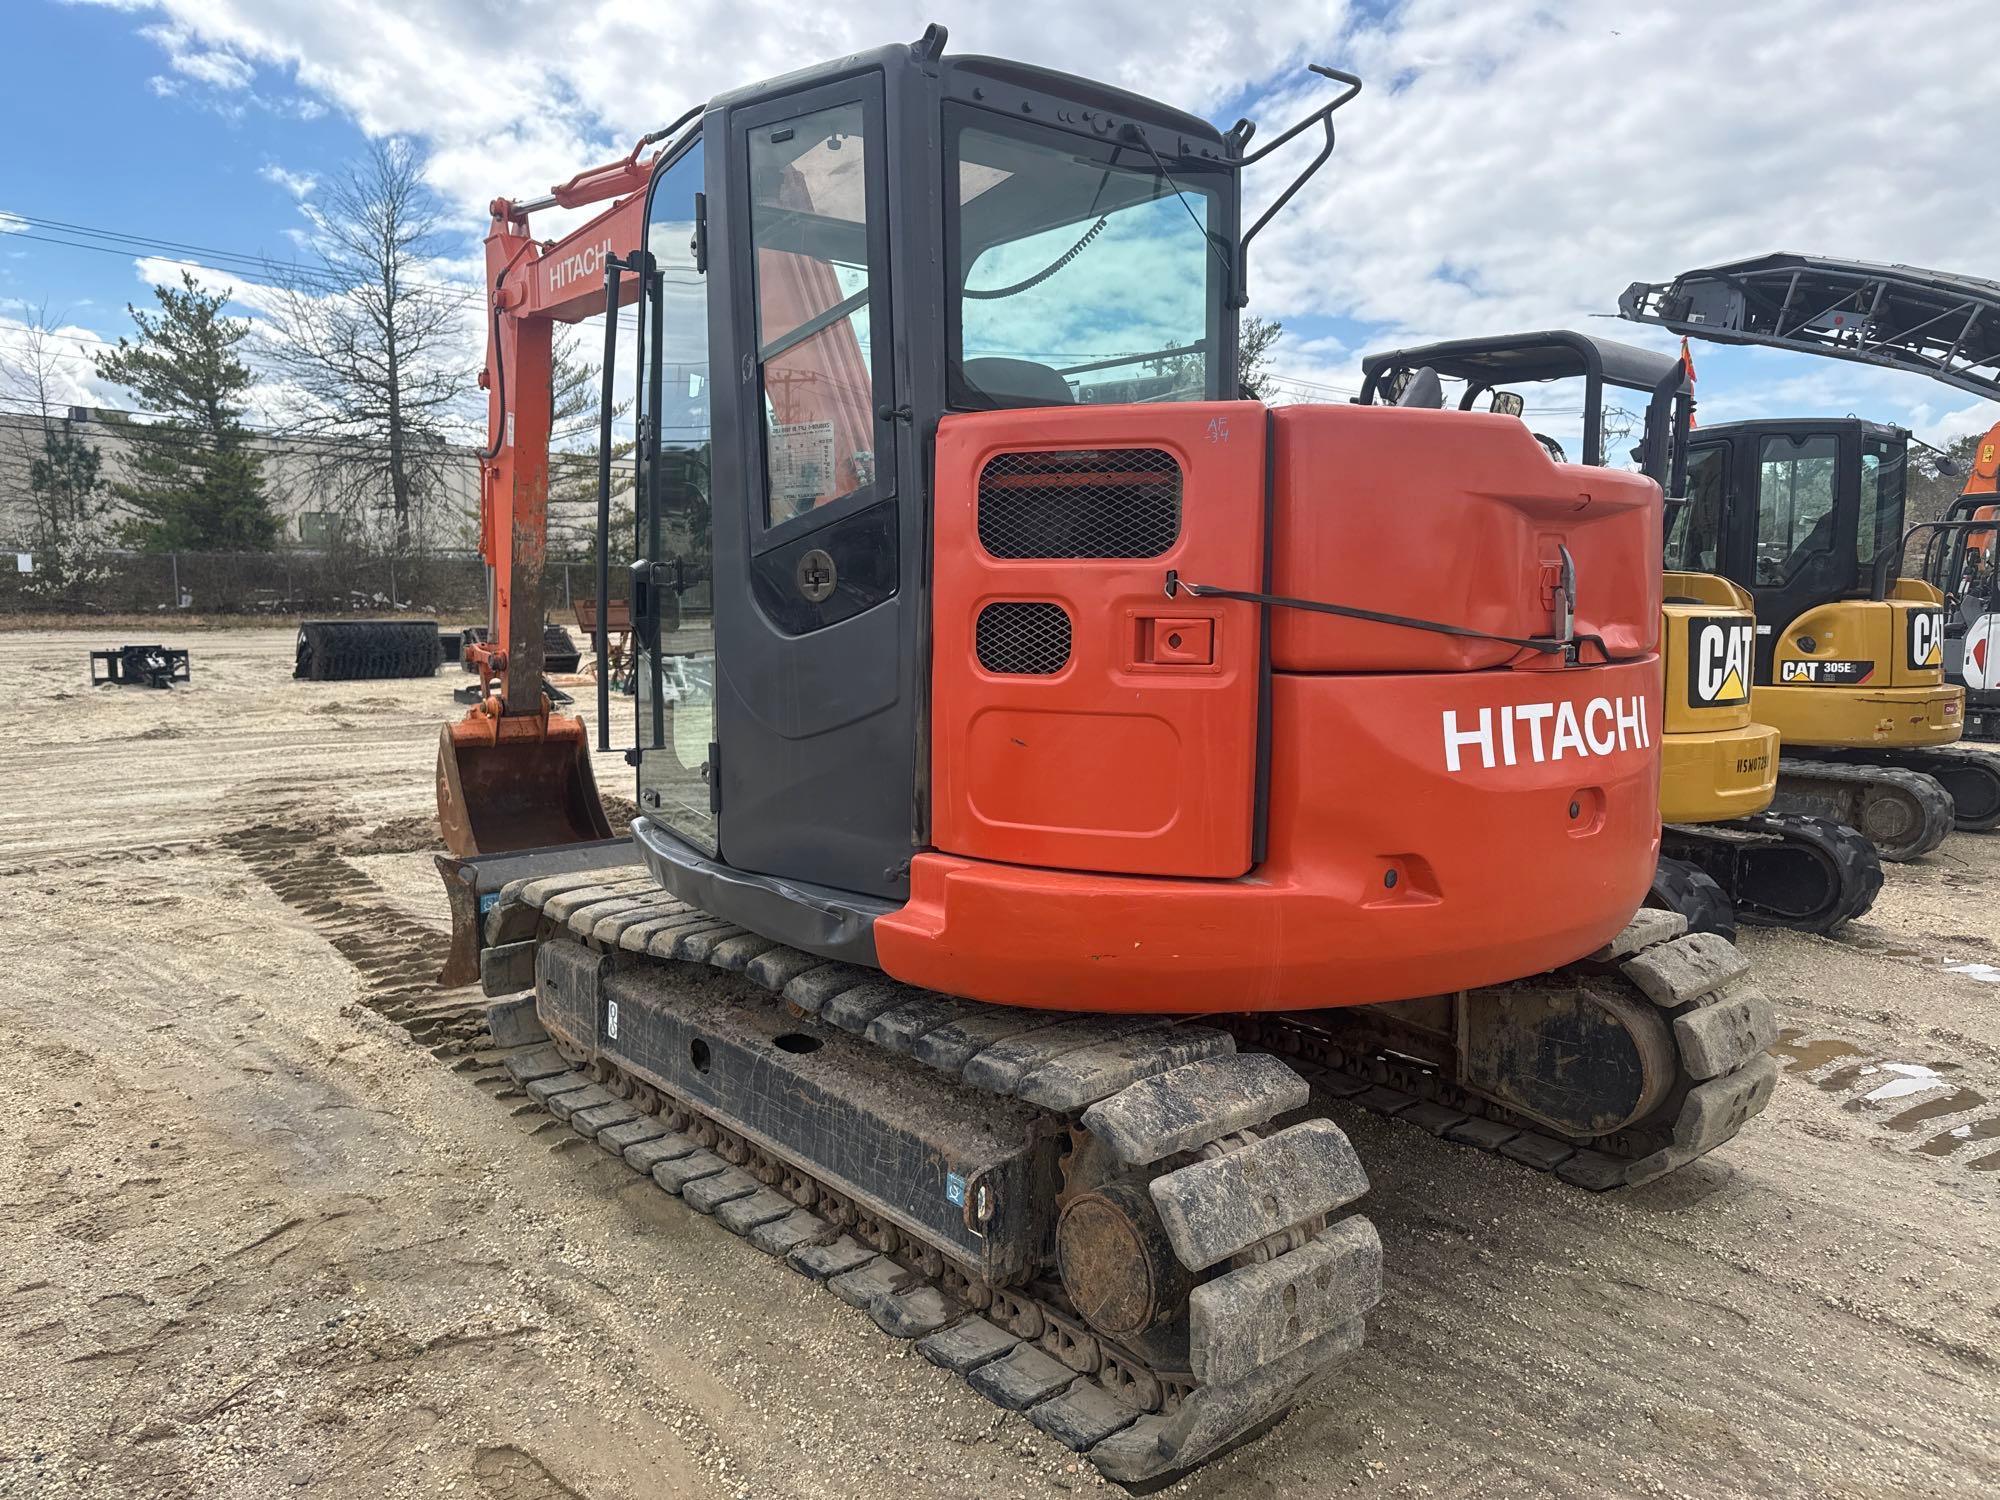 2014 HITACHI ZX85USB-5 HYDRAULIC EXCAVATOR SN; 017465 powered by diesel engine, equipped with Cab,